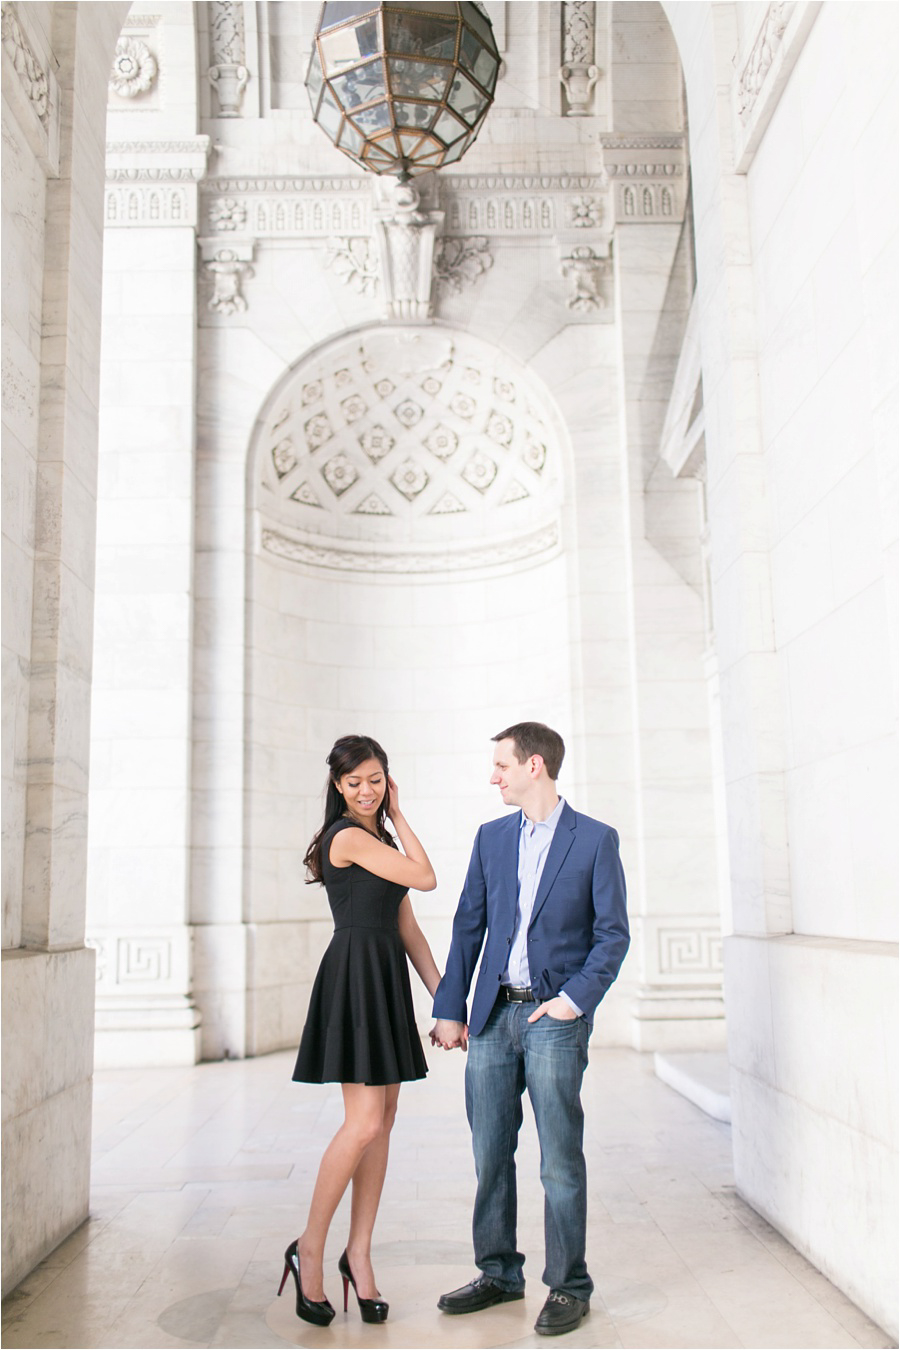 Bryant Park Engagement Photos - Amy Rizzuto Photography-20